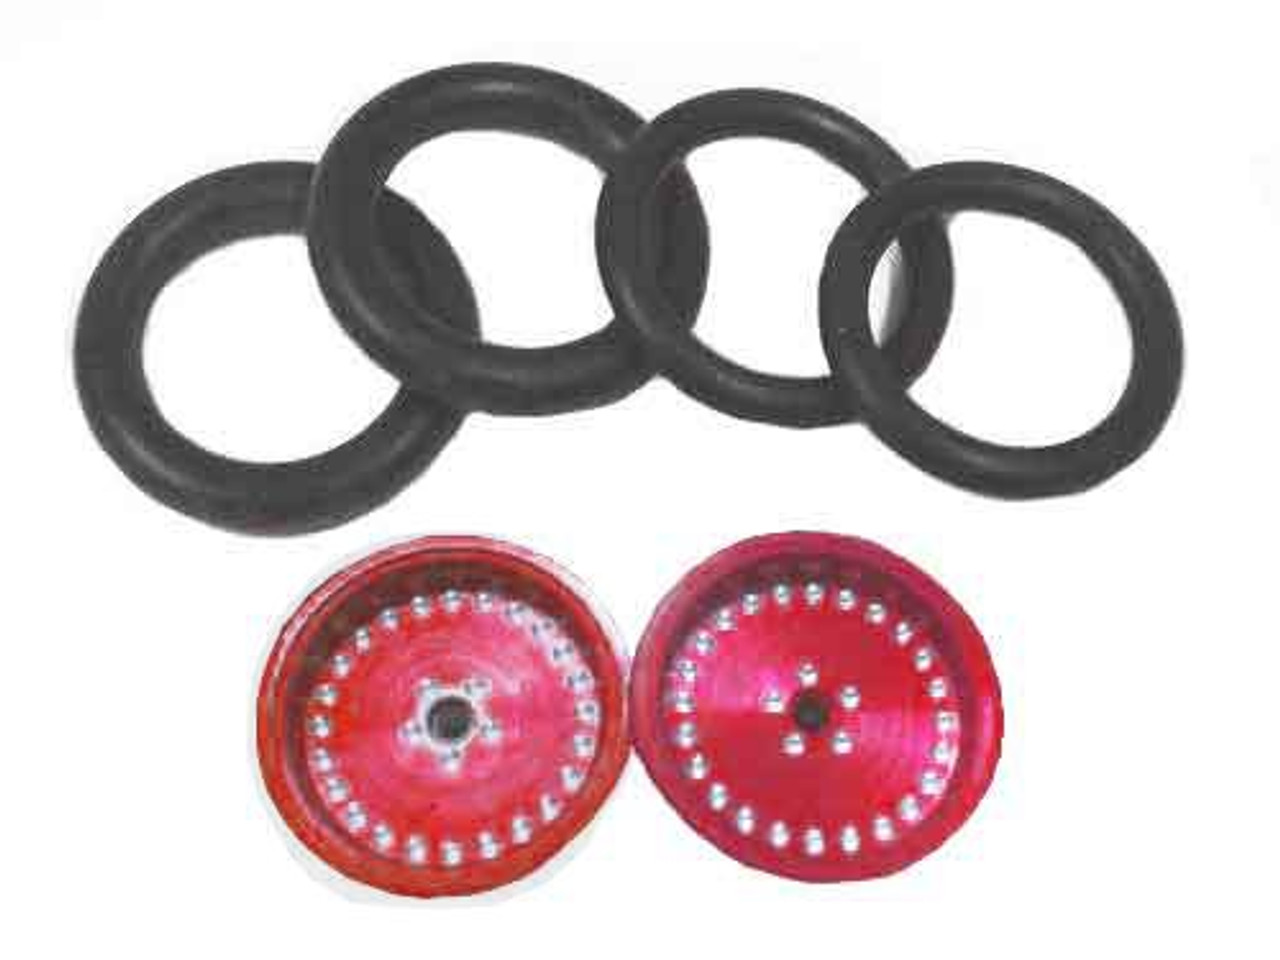 Pro-Track 3/4 x 1/16 x 1/8 wide Style G - Red - PTC-411G-R